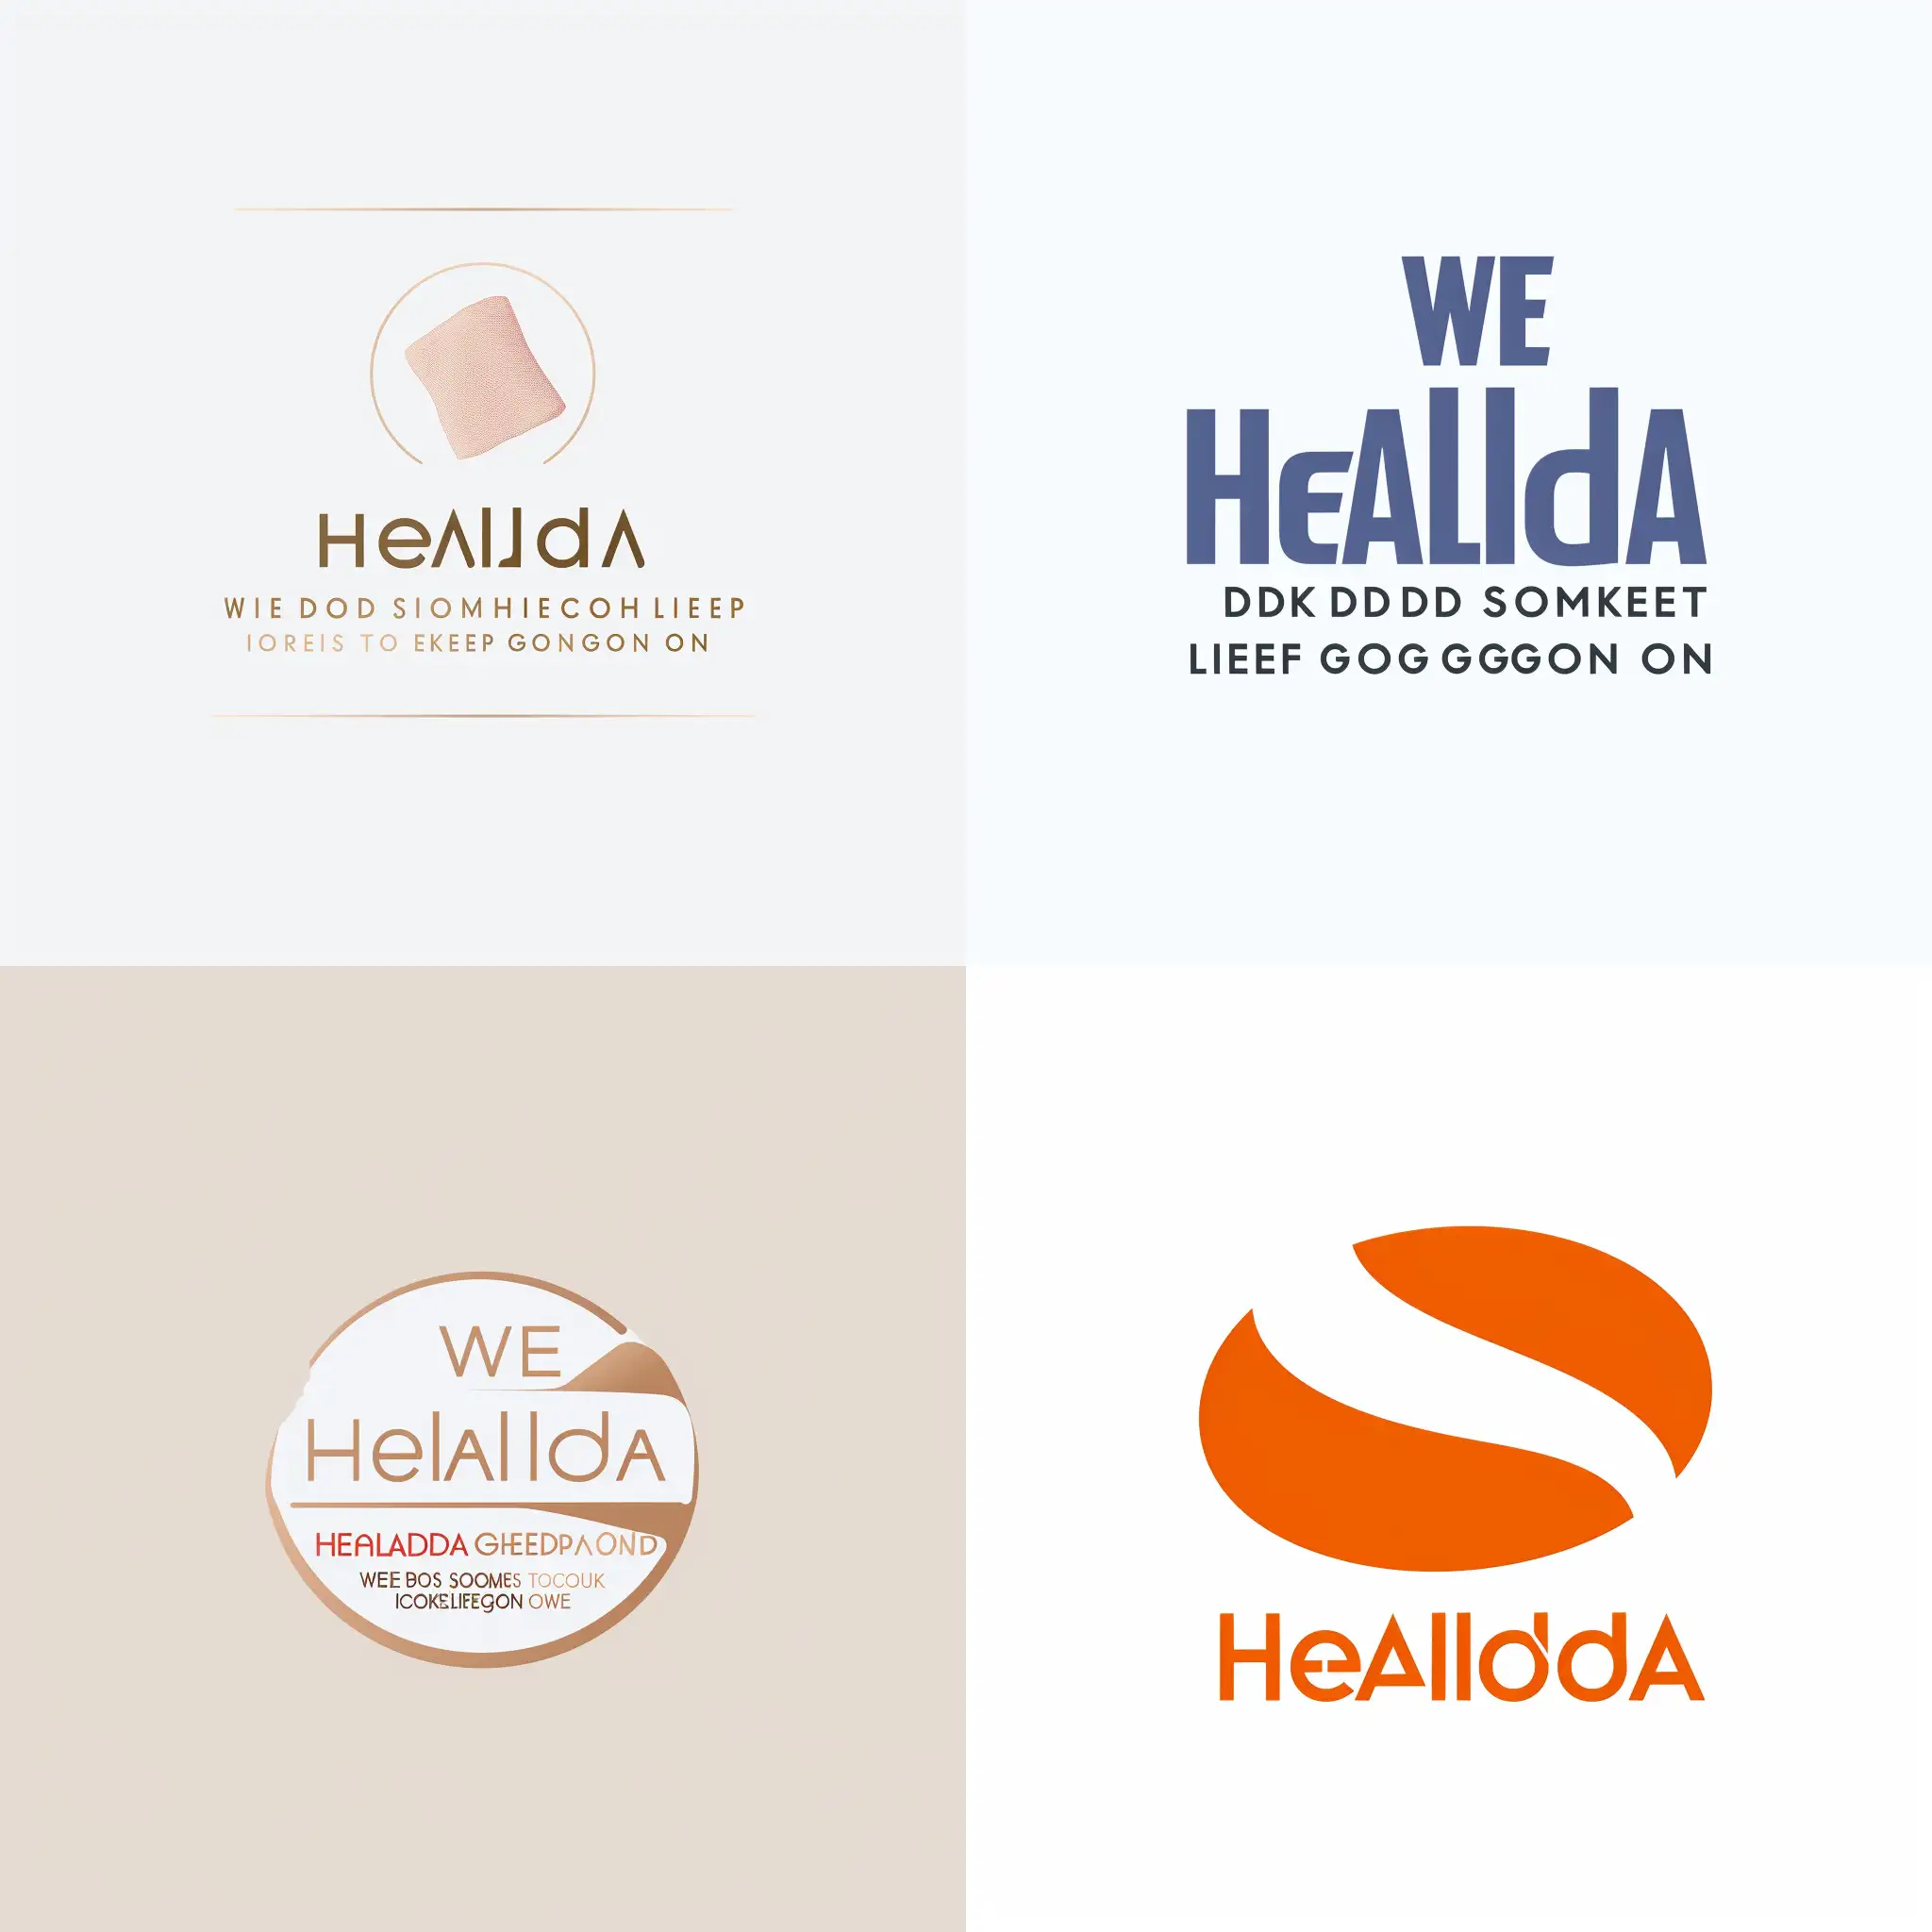 minimalist logo for "Healda" company which is active in pharmaceutical and medical device production based on absorbable polymers such as hemostatic dressing and intravascular occluder. Healda’s mission is "WE DO SOMETHING TO KEEP LIFE GOING ON"